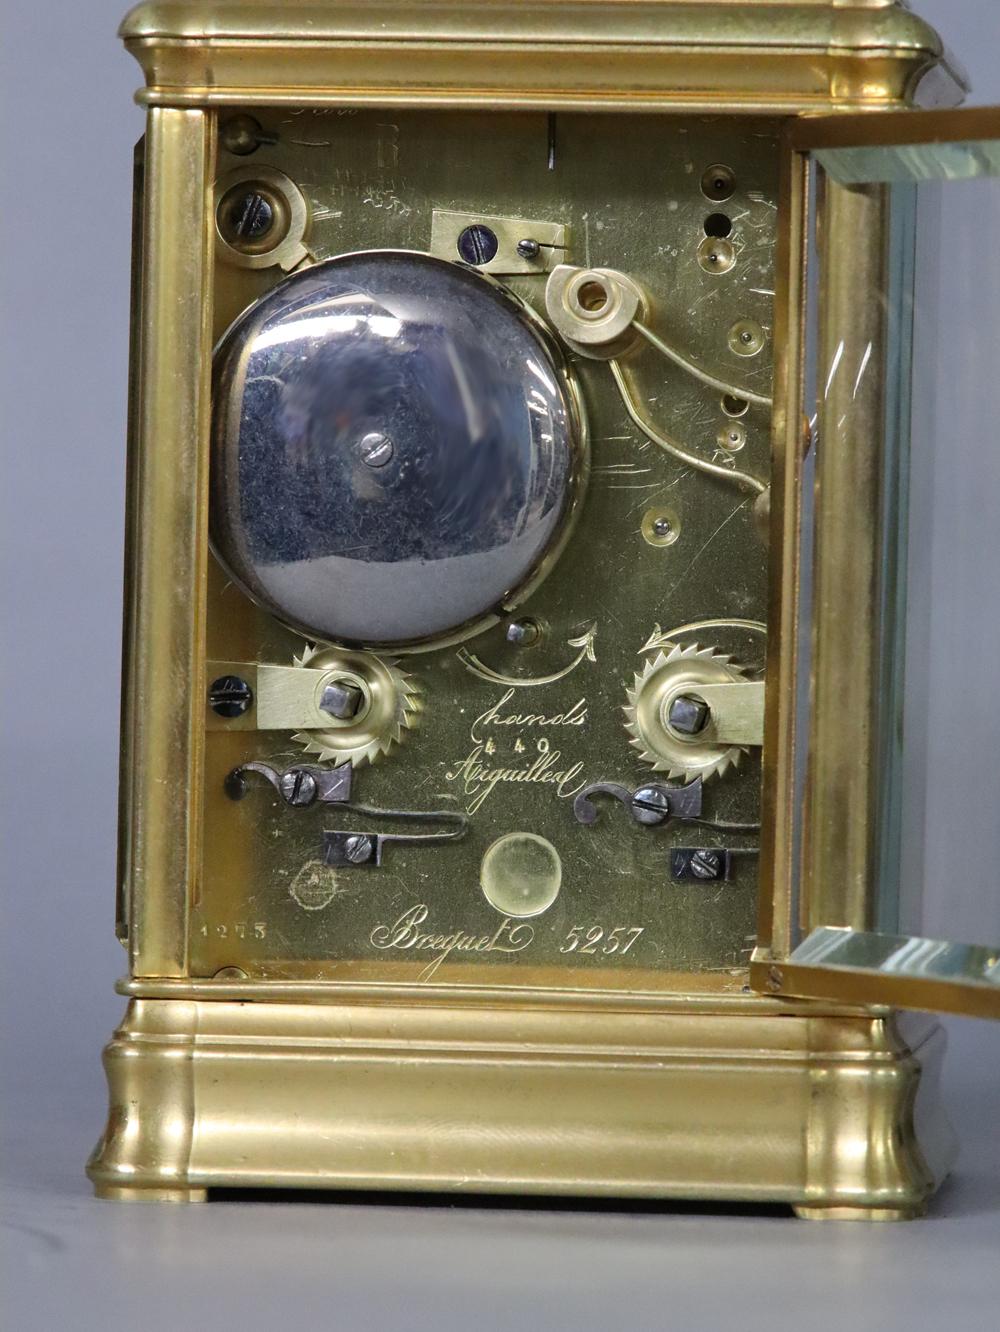 c.1876 French Quarter-Striking Carriage Clock by Breguet In Good Condition For Sale In Greenlawn, NY